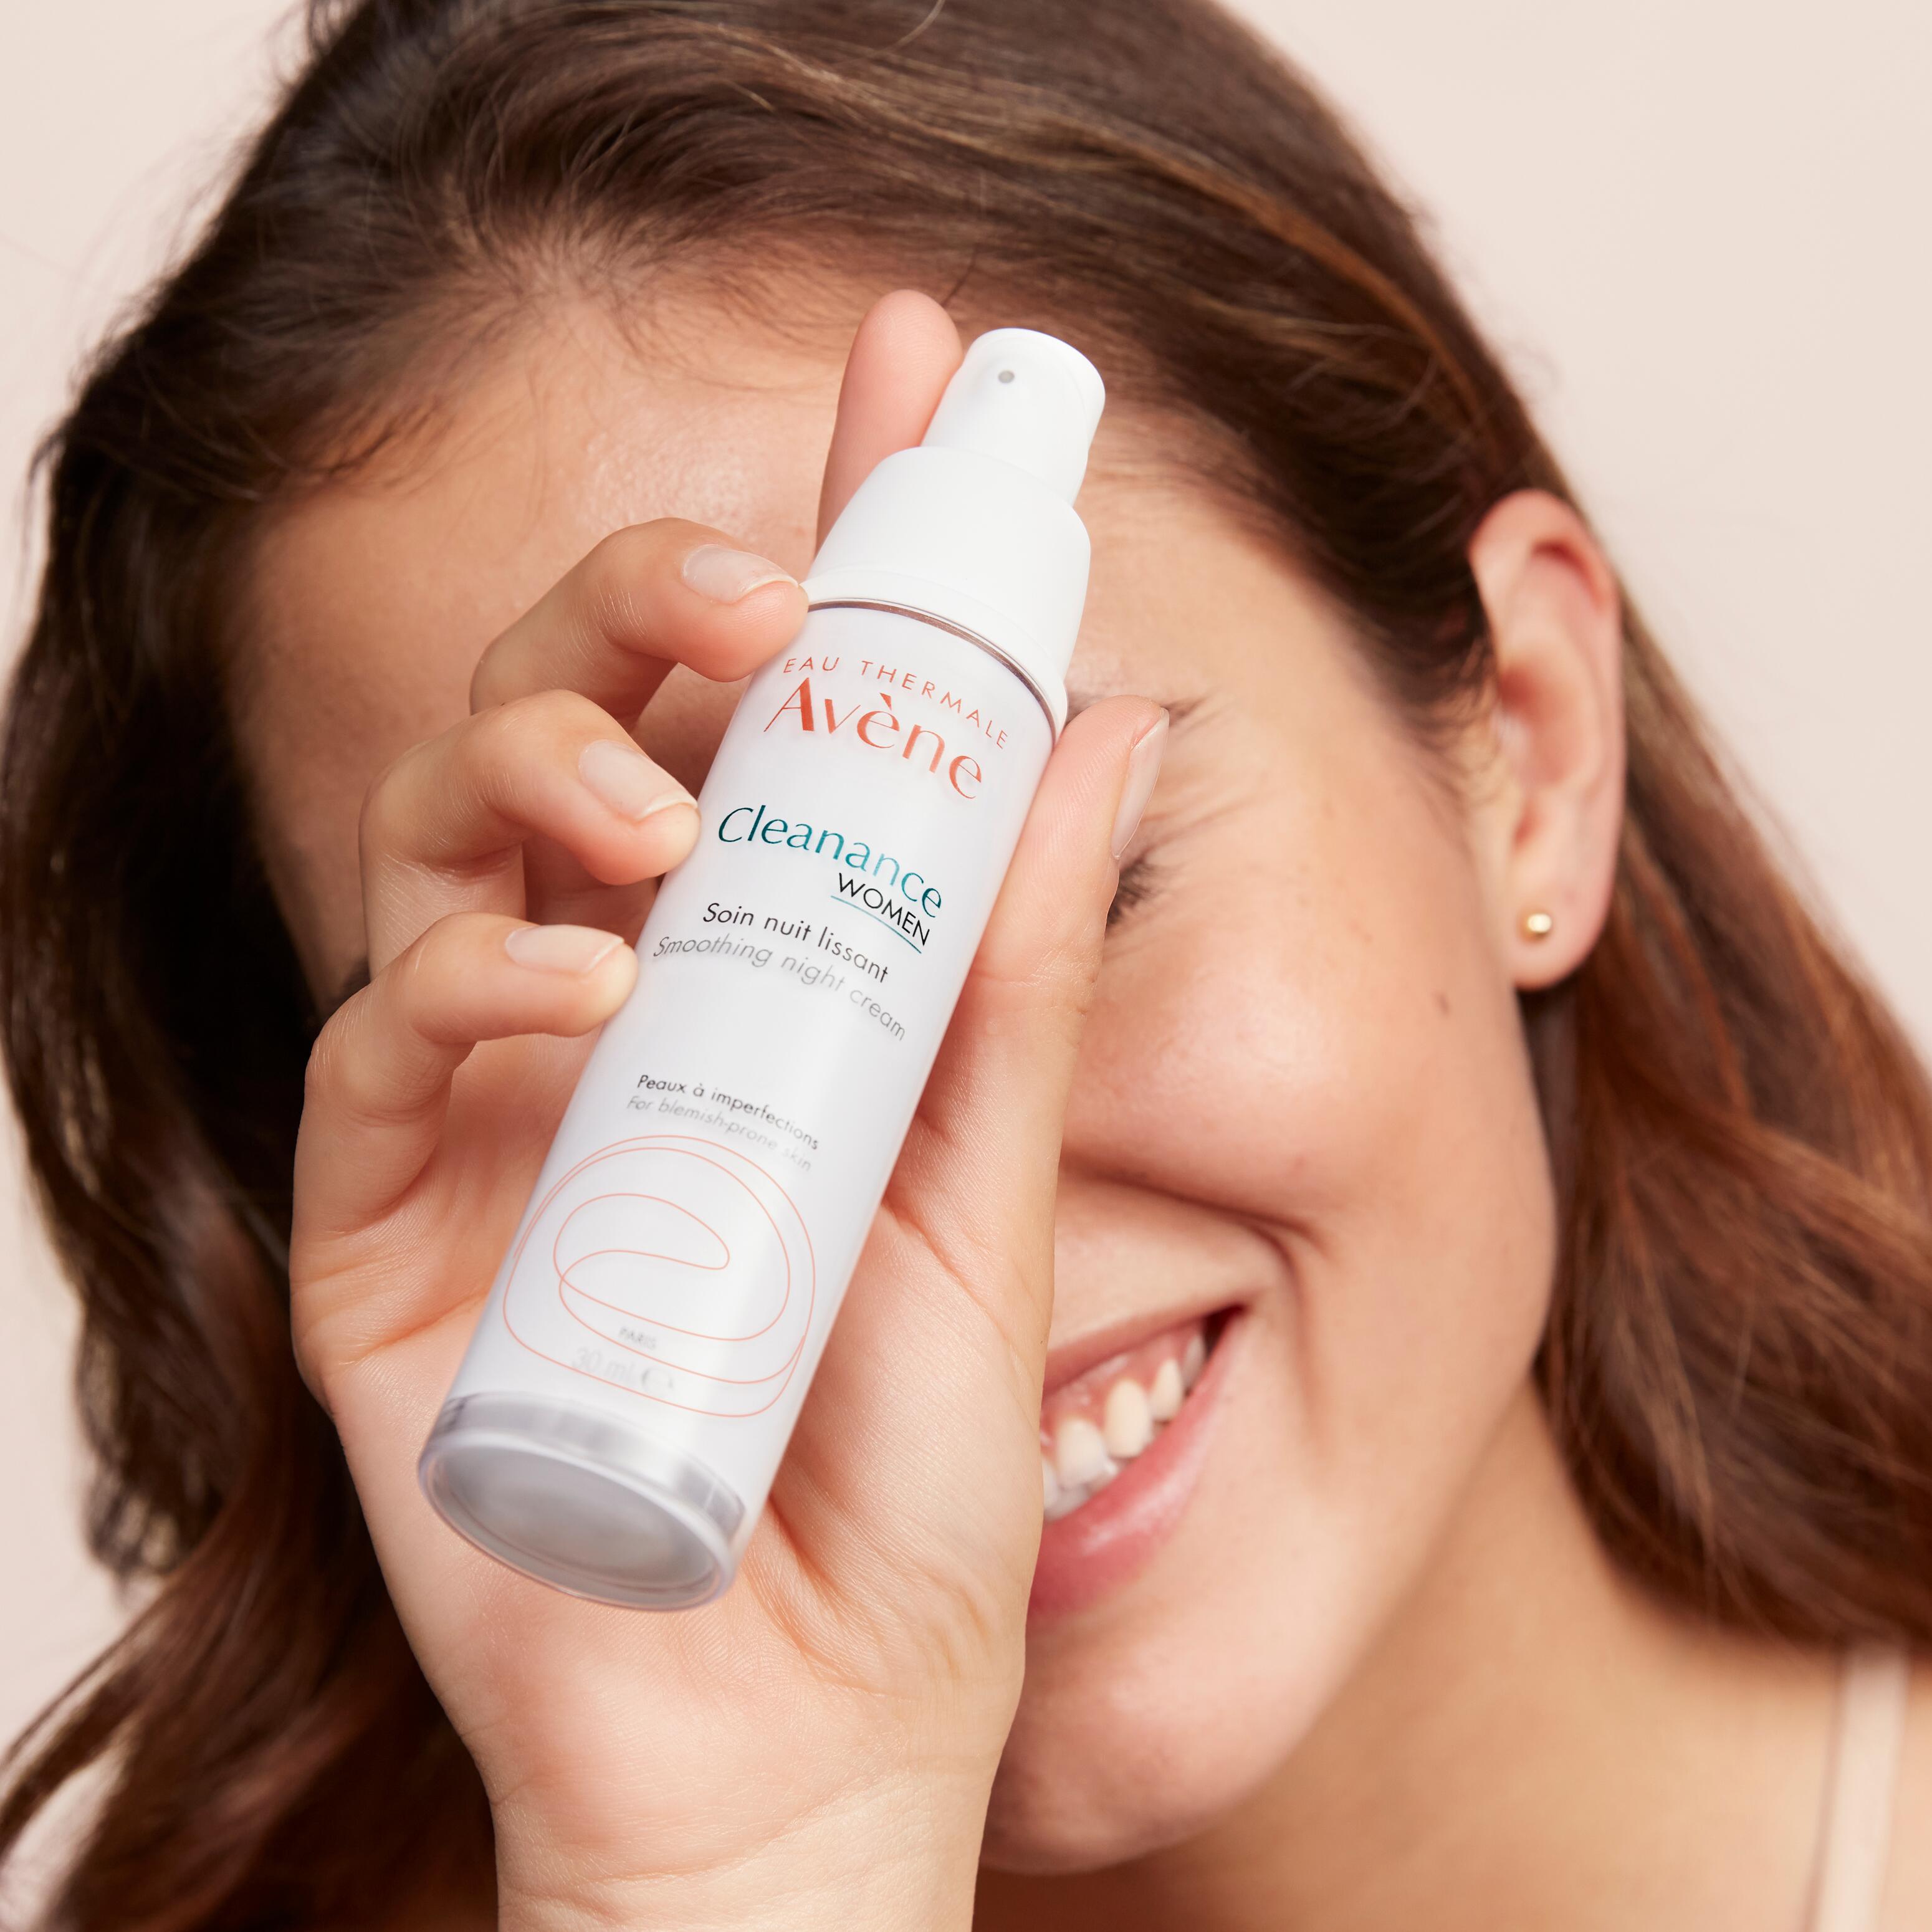 Avene outsmarts acne with Cleanance Expert